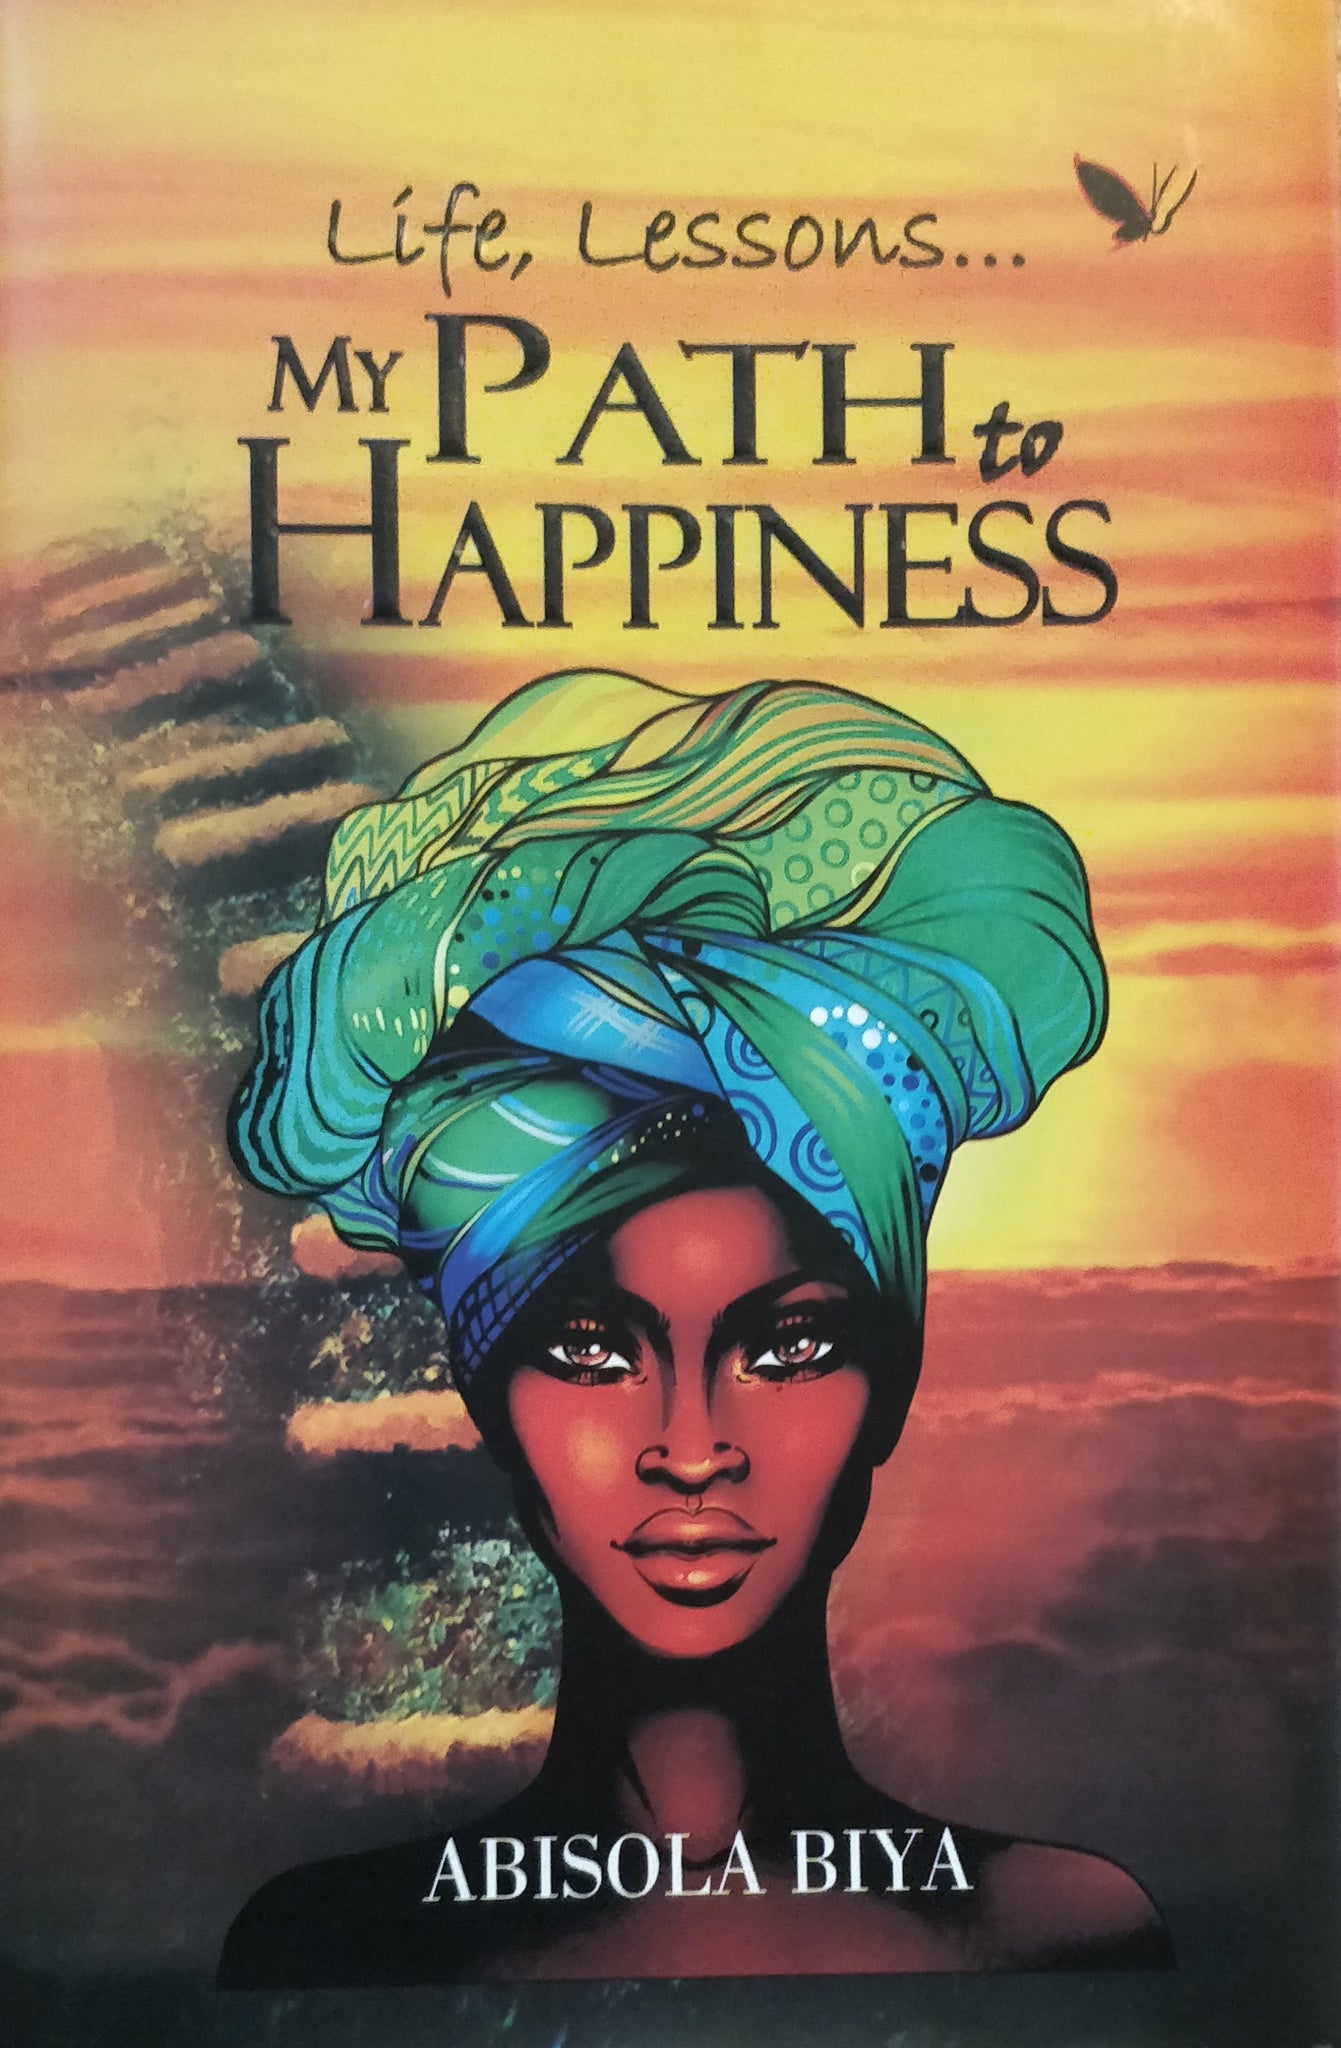 My Path to Happiness